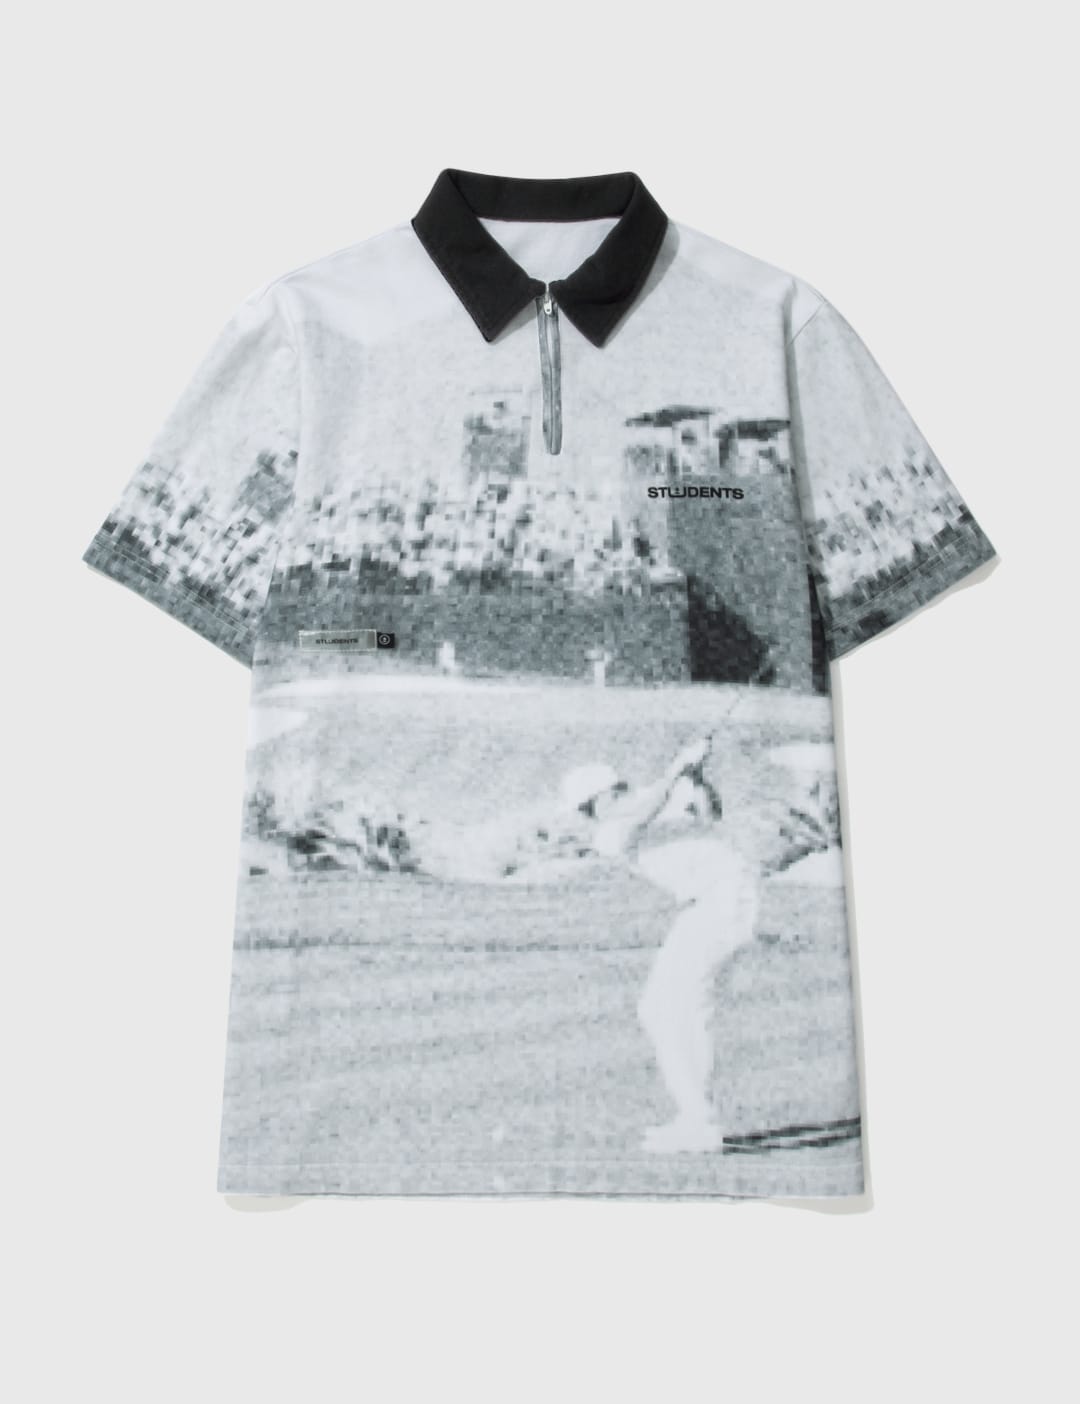 Stüssy - Striped Knit Shirt | HBX - Globally Curated Fashion and 